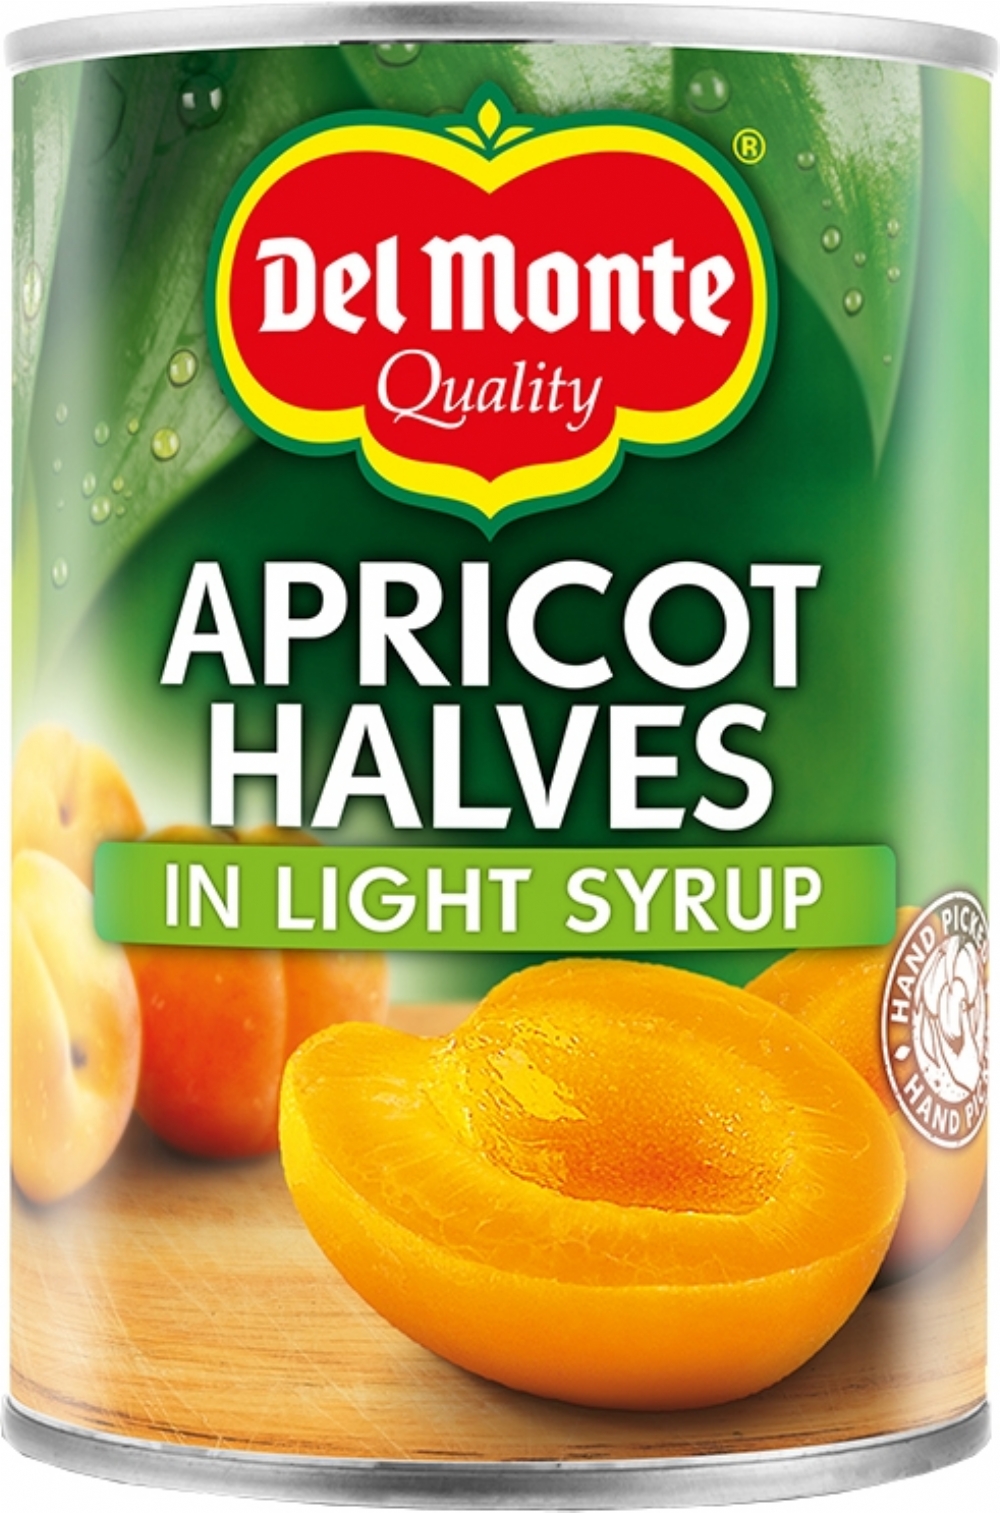 DEL MONTE Apricot Halves in Light Syrup 420g